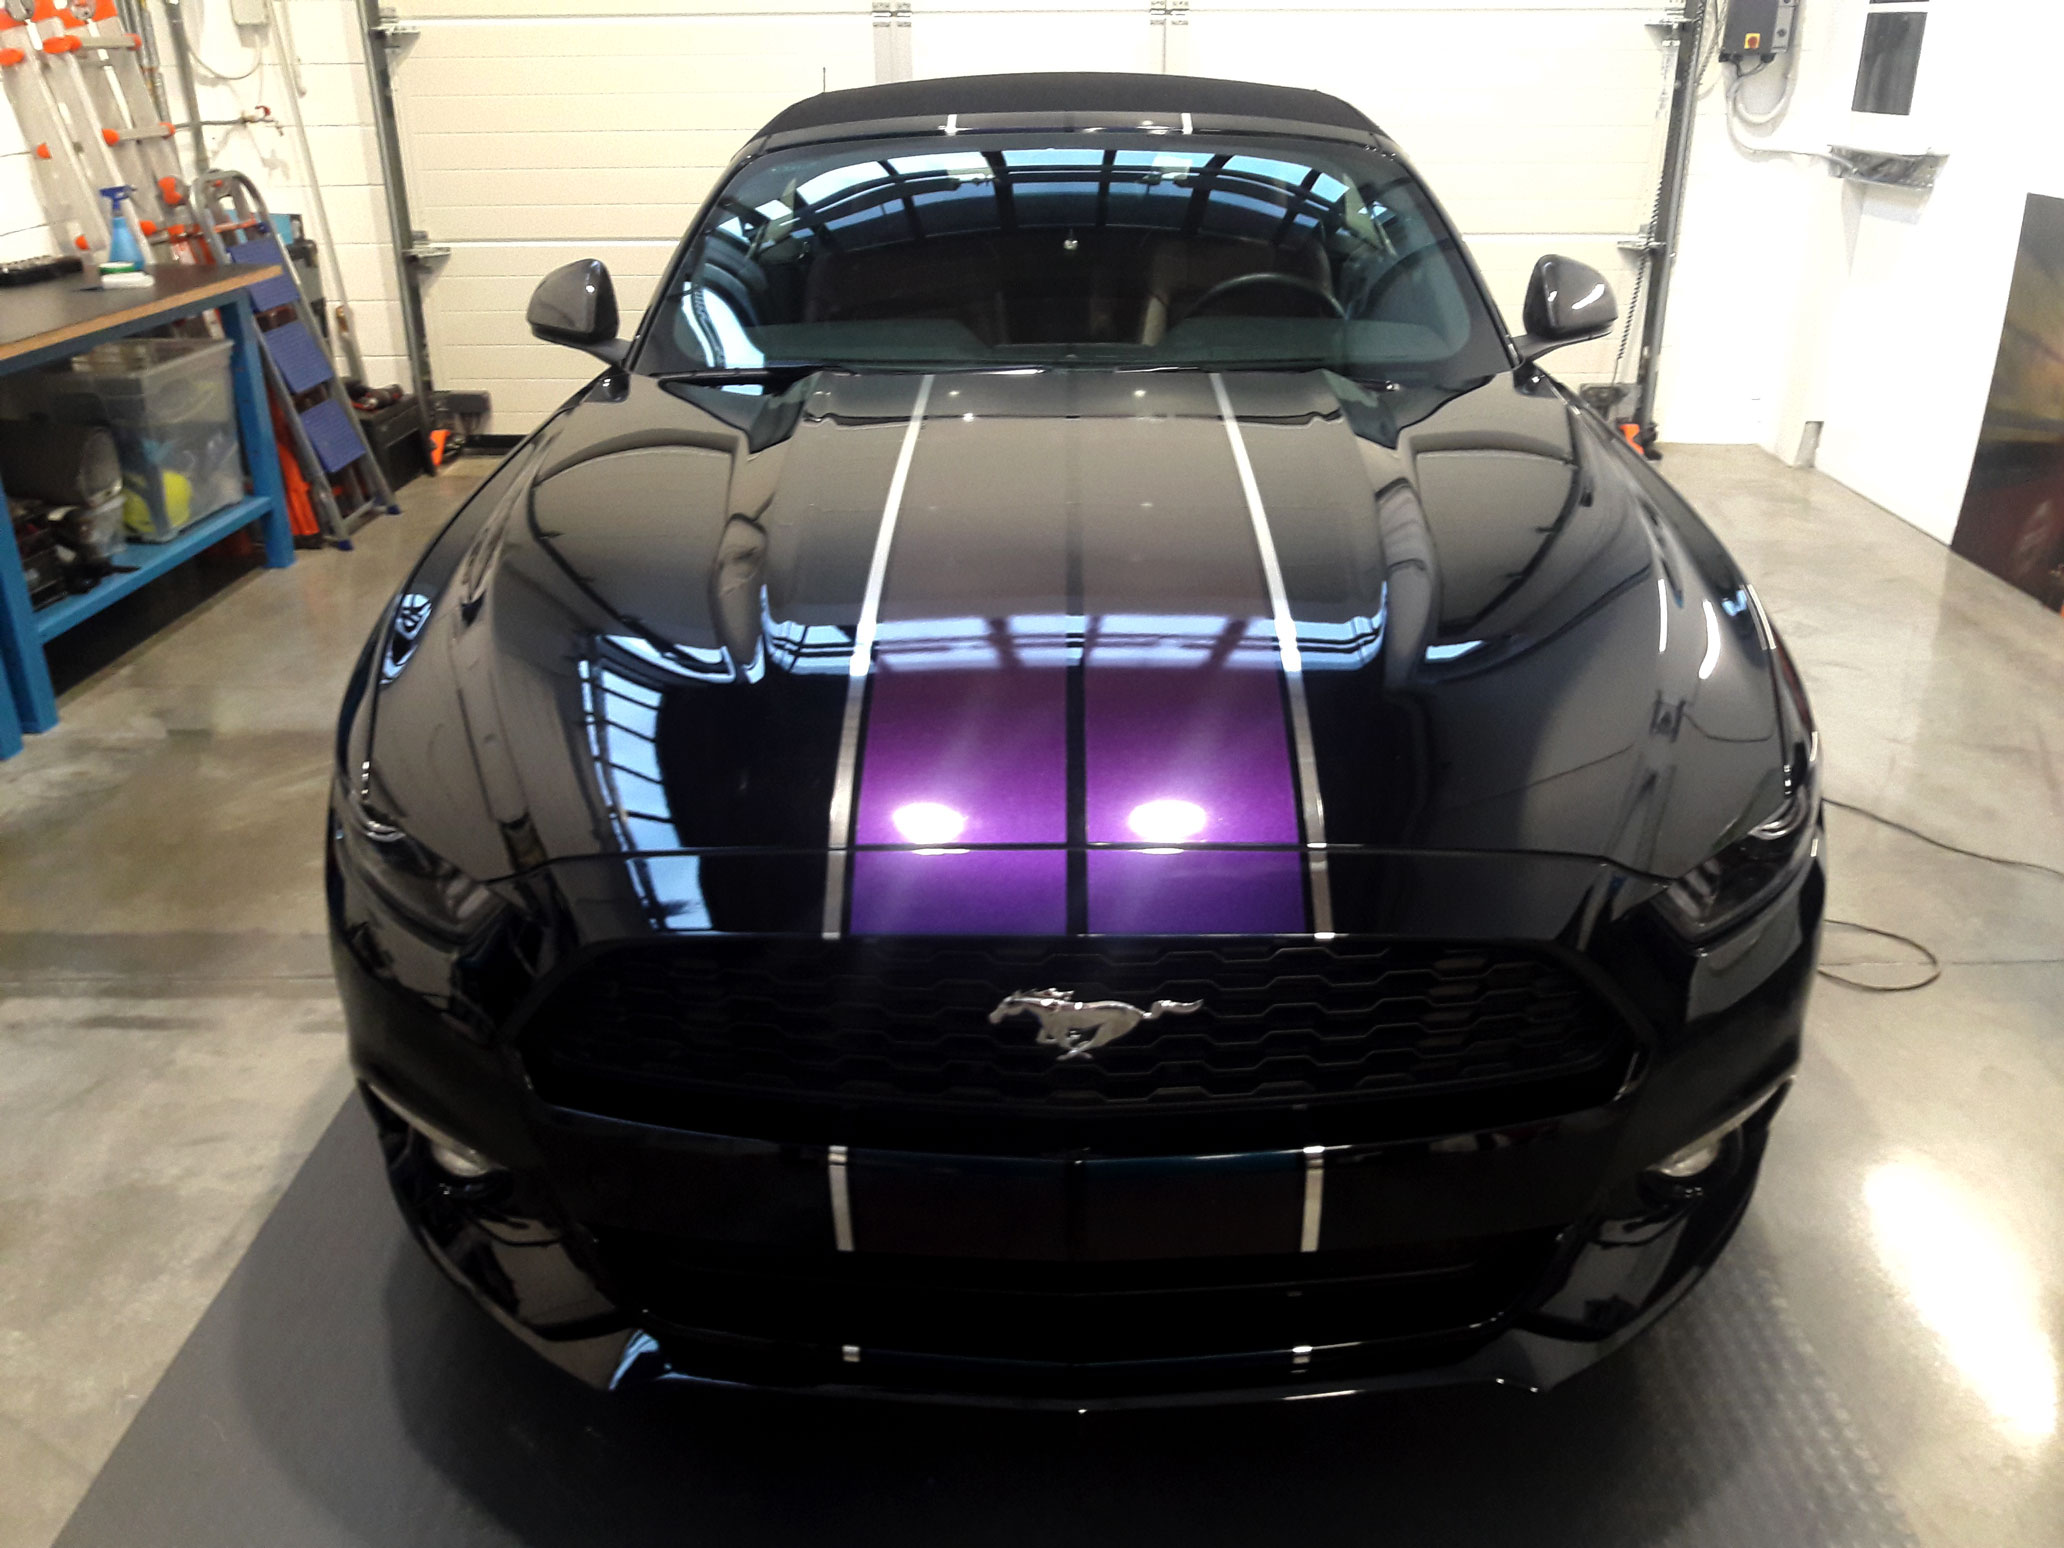 side-printing-carwrapping-wrapping-wrap-ford-mustang-stripes-violet-strisce-viola-pellicola-3m-endorsed-installer-auto-sportiva-lusso-piacenza